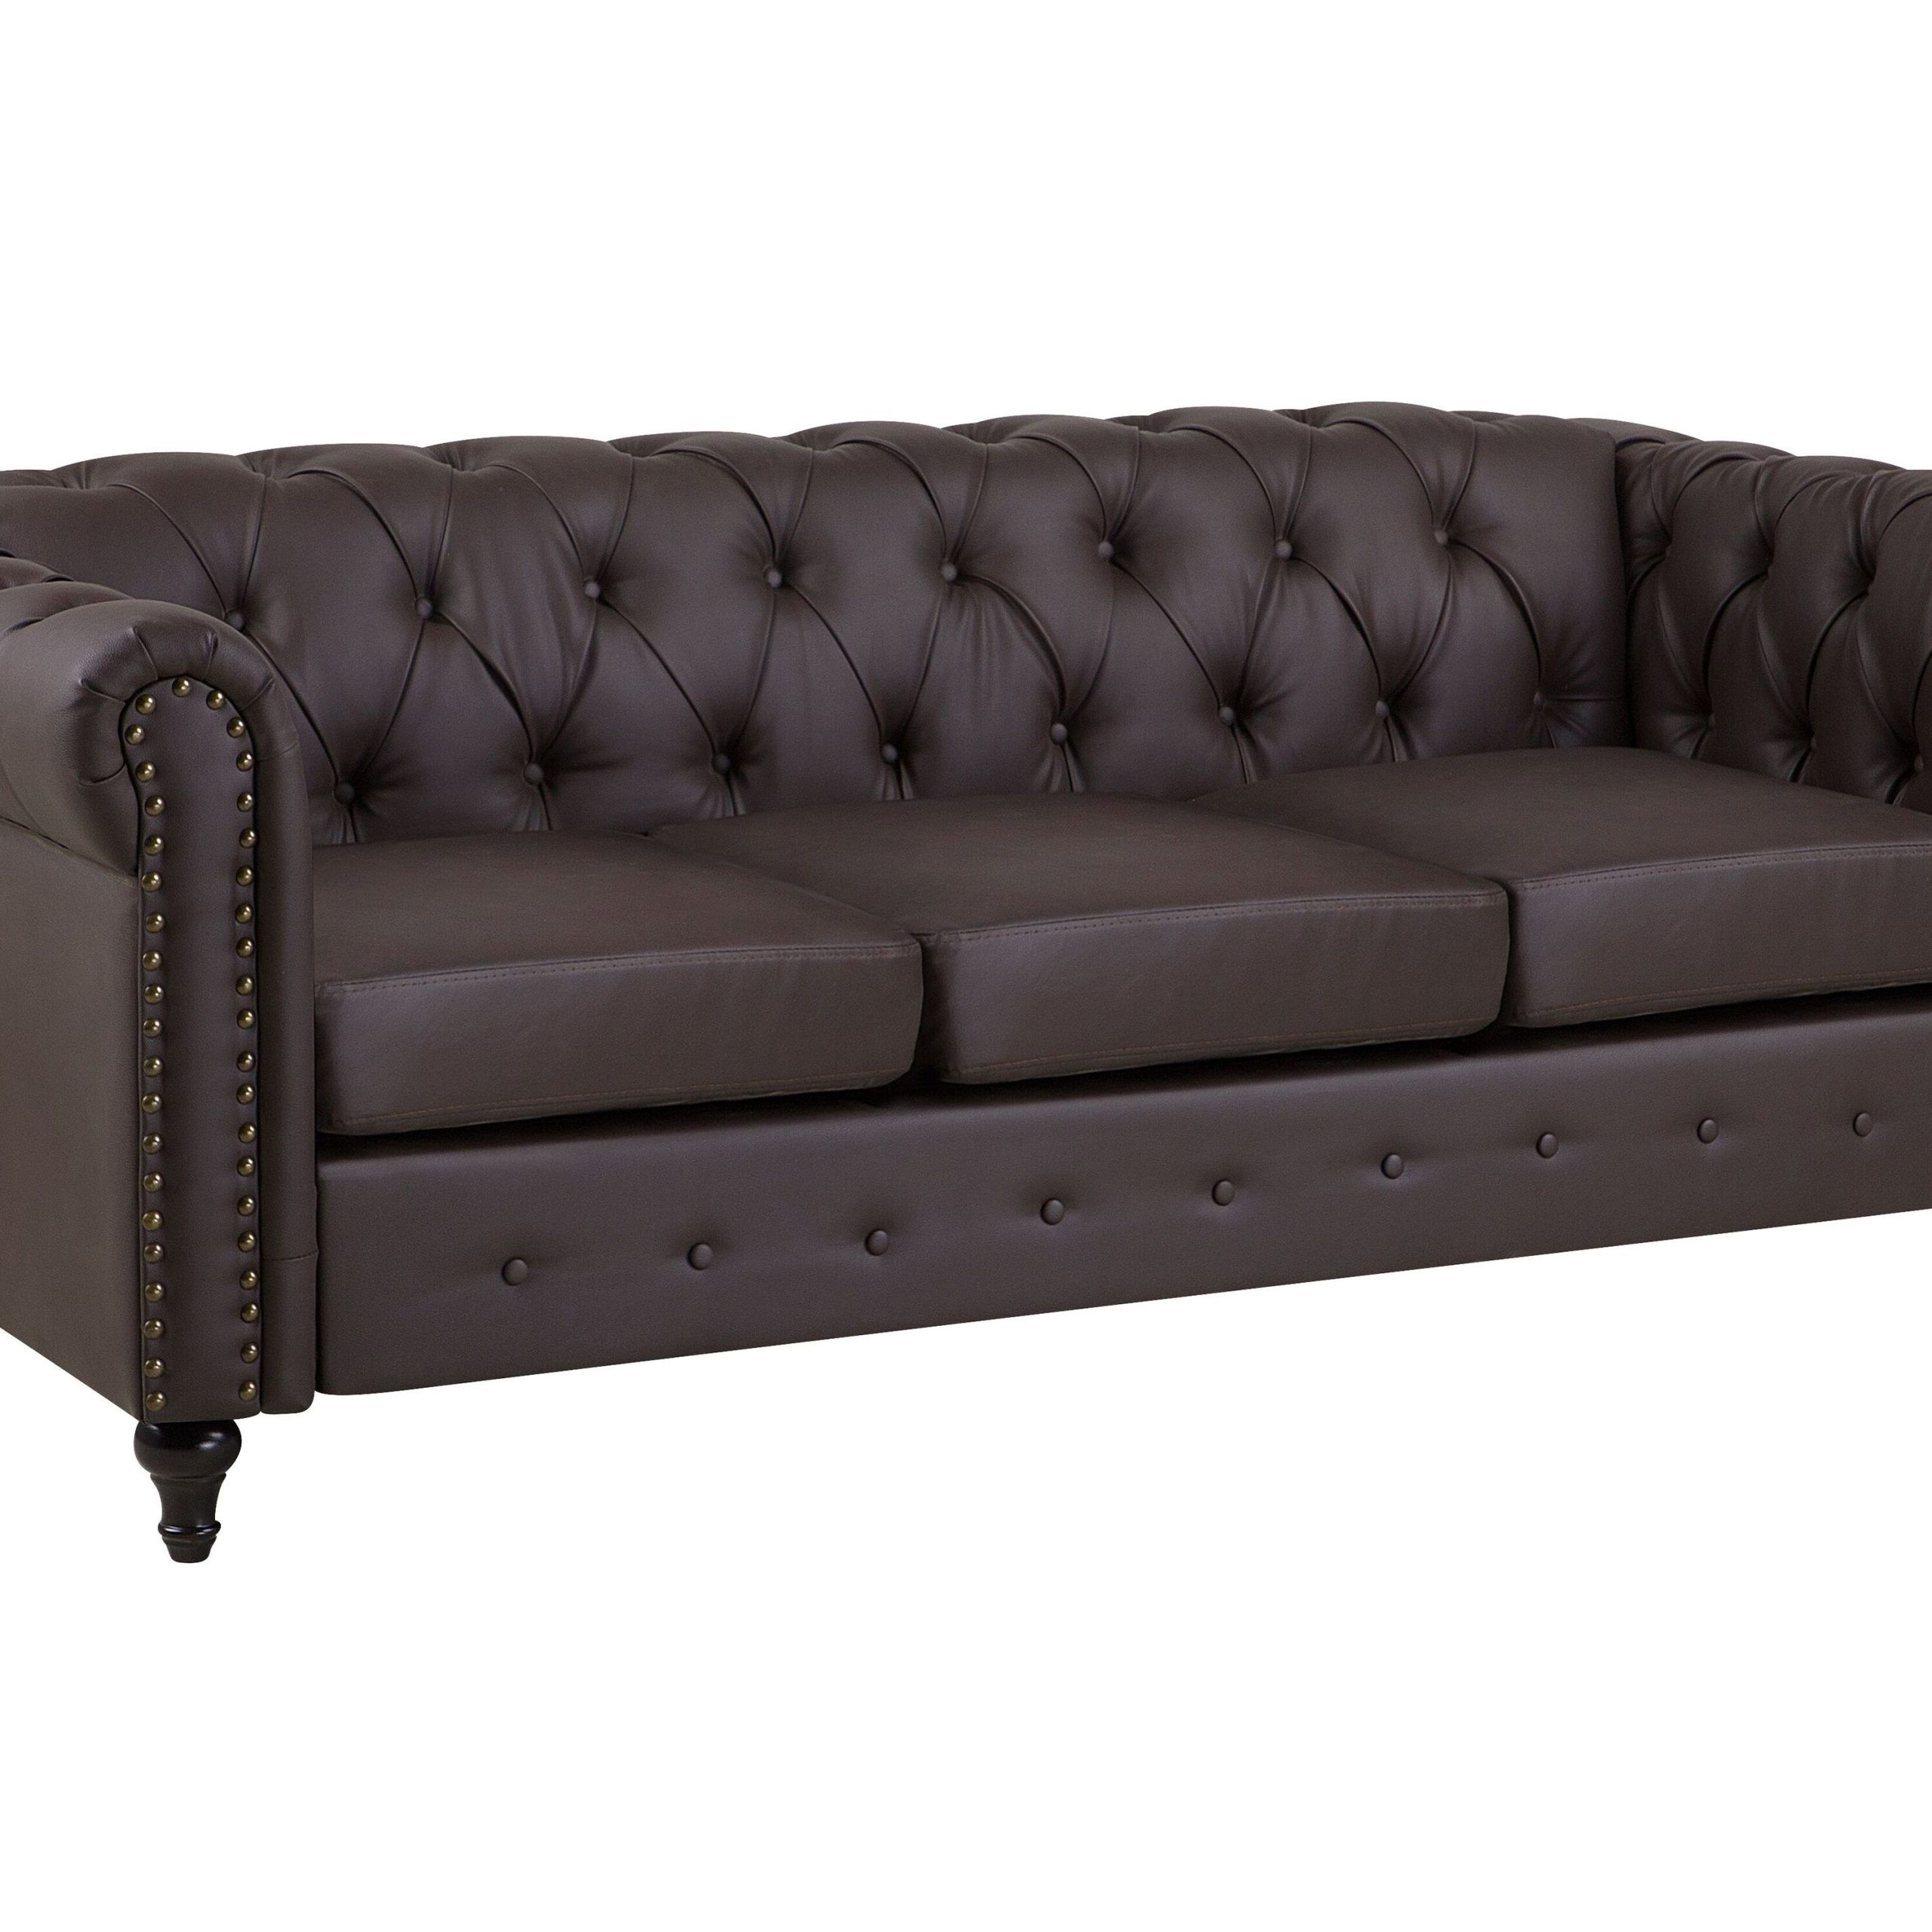 Current Traditional 3 Seater Faux Leather Sofas Intended For 3 Seater Faux Leather Sofa Brown Chesterfield (View 3 of 15)